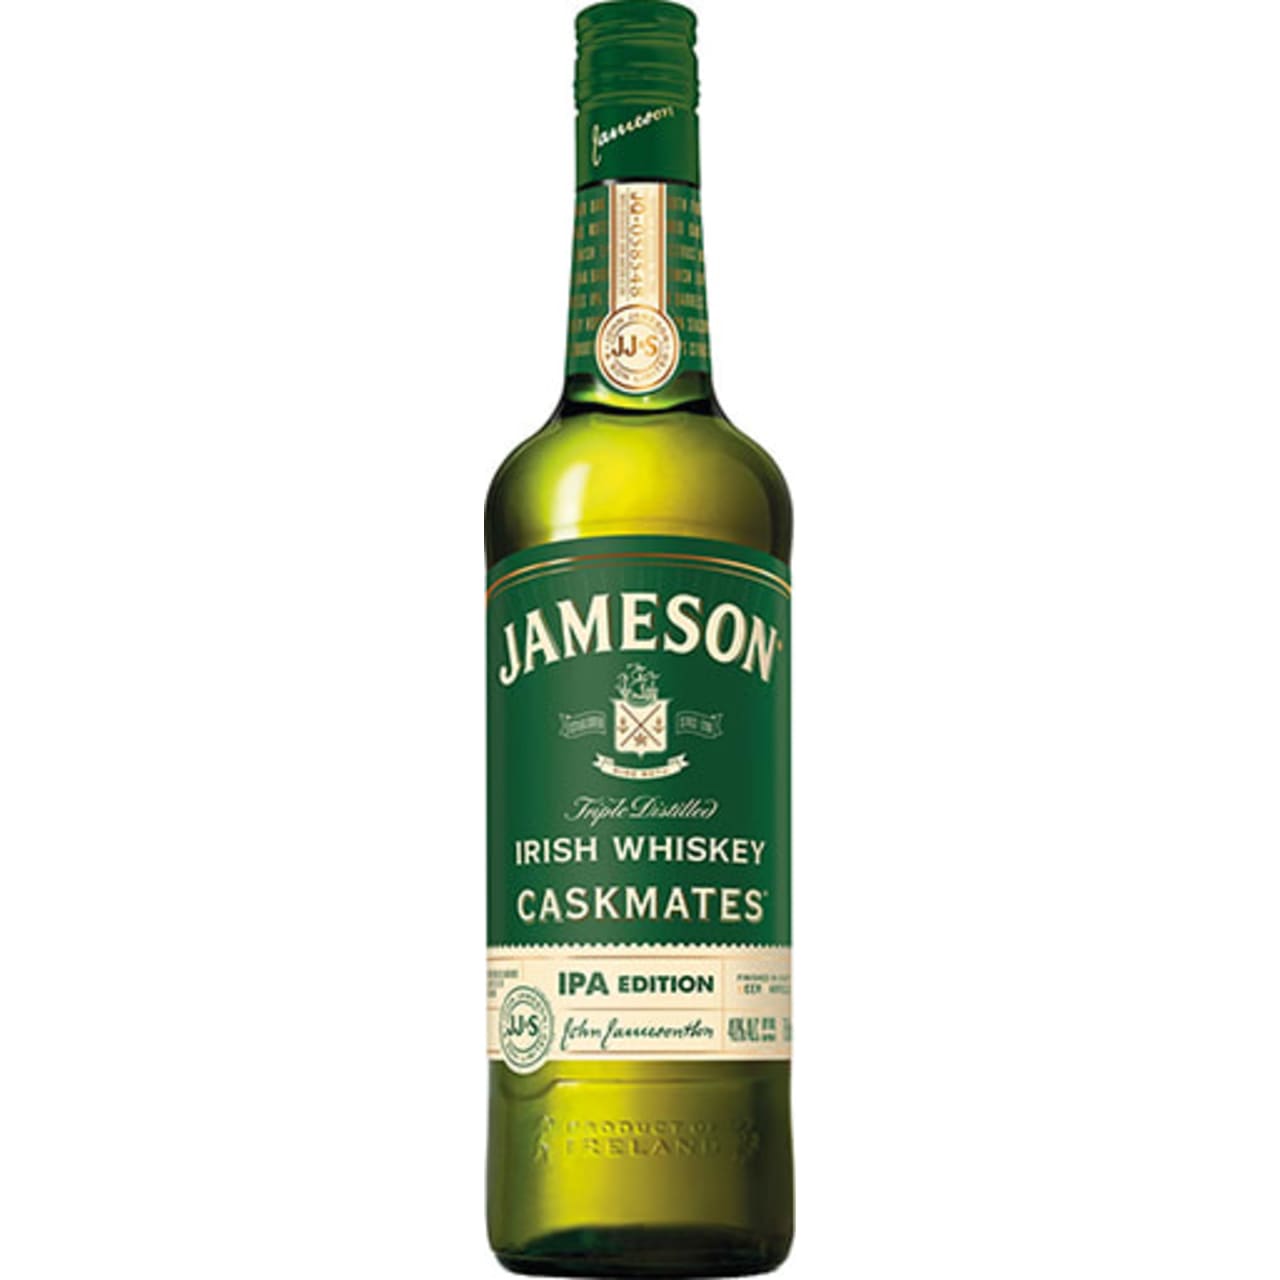 The second release in Jameson Caskmates range, finished this time in casks that once held zesty IPA. The combination adds further layers of hop fruitiness to the whiskies already fruity character as well as a touch of citrus, floral notes and some balancing bitterness.